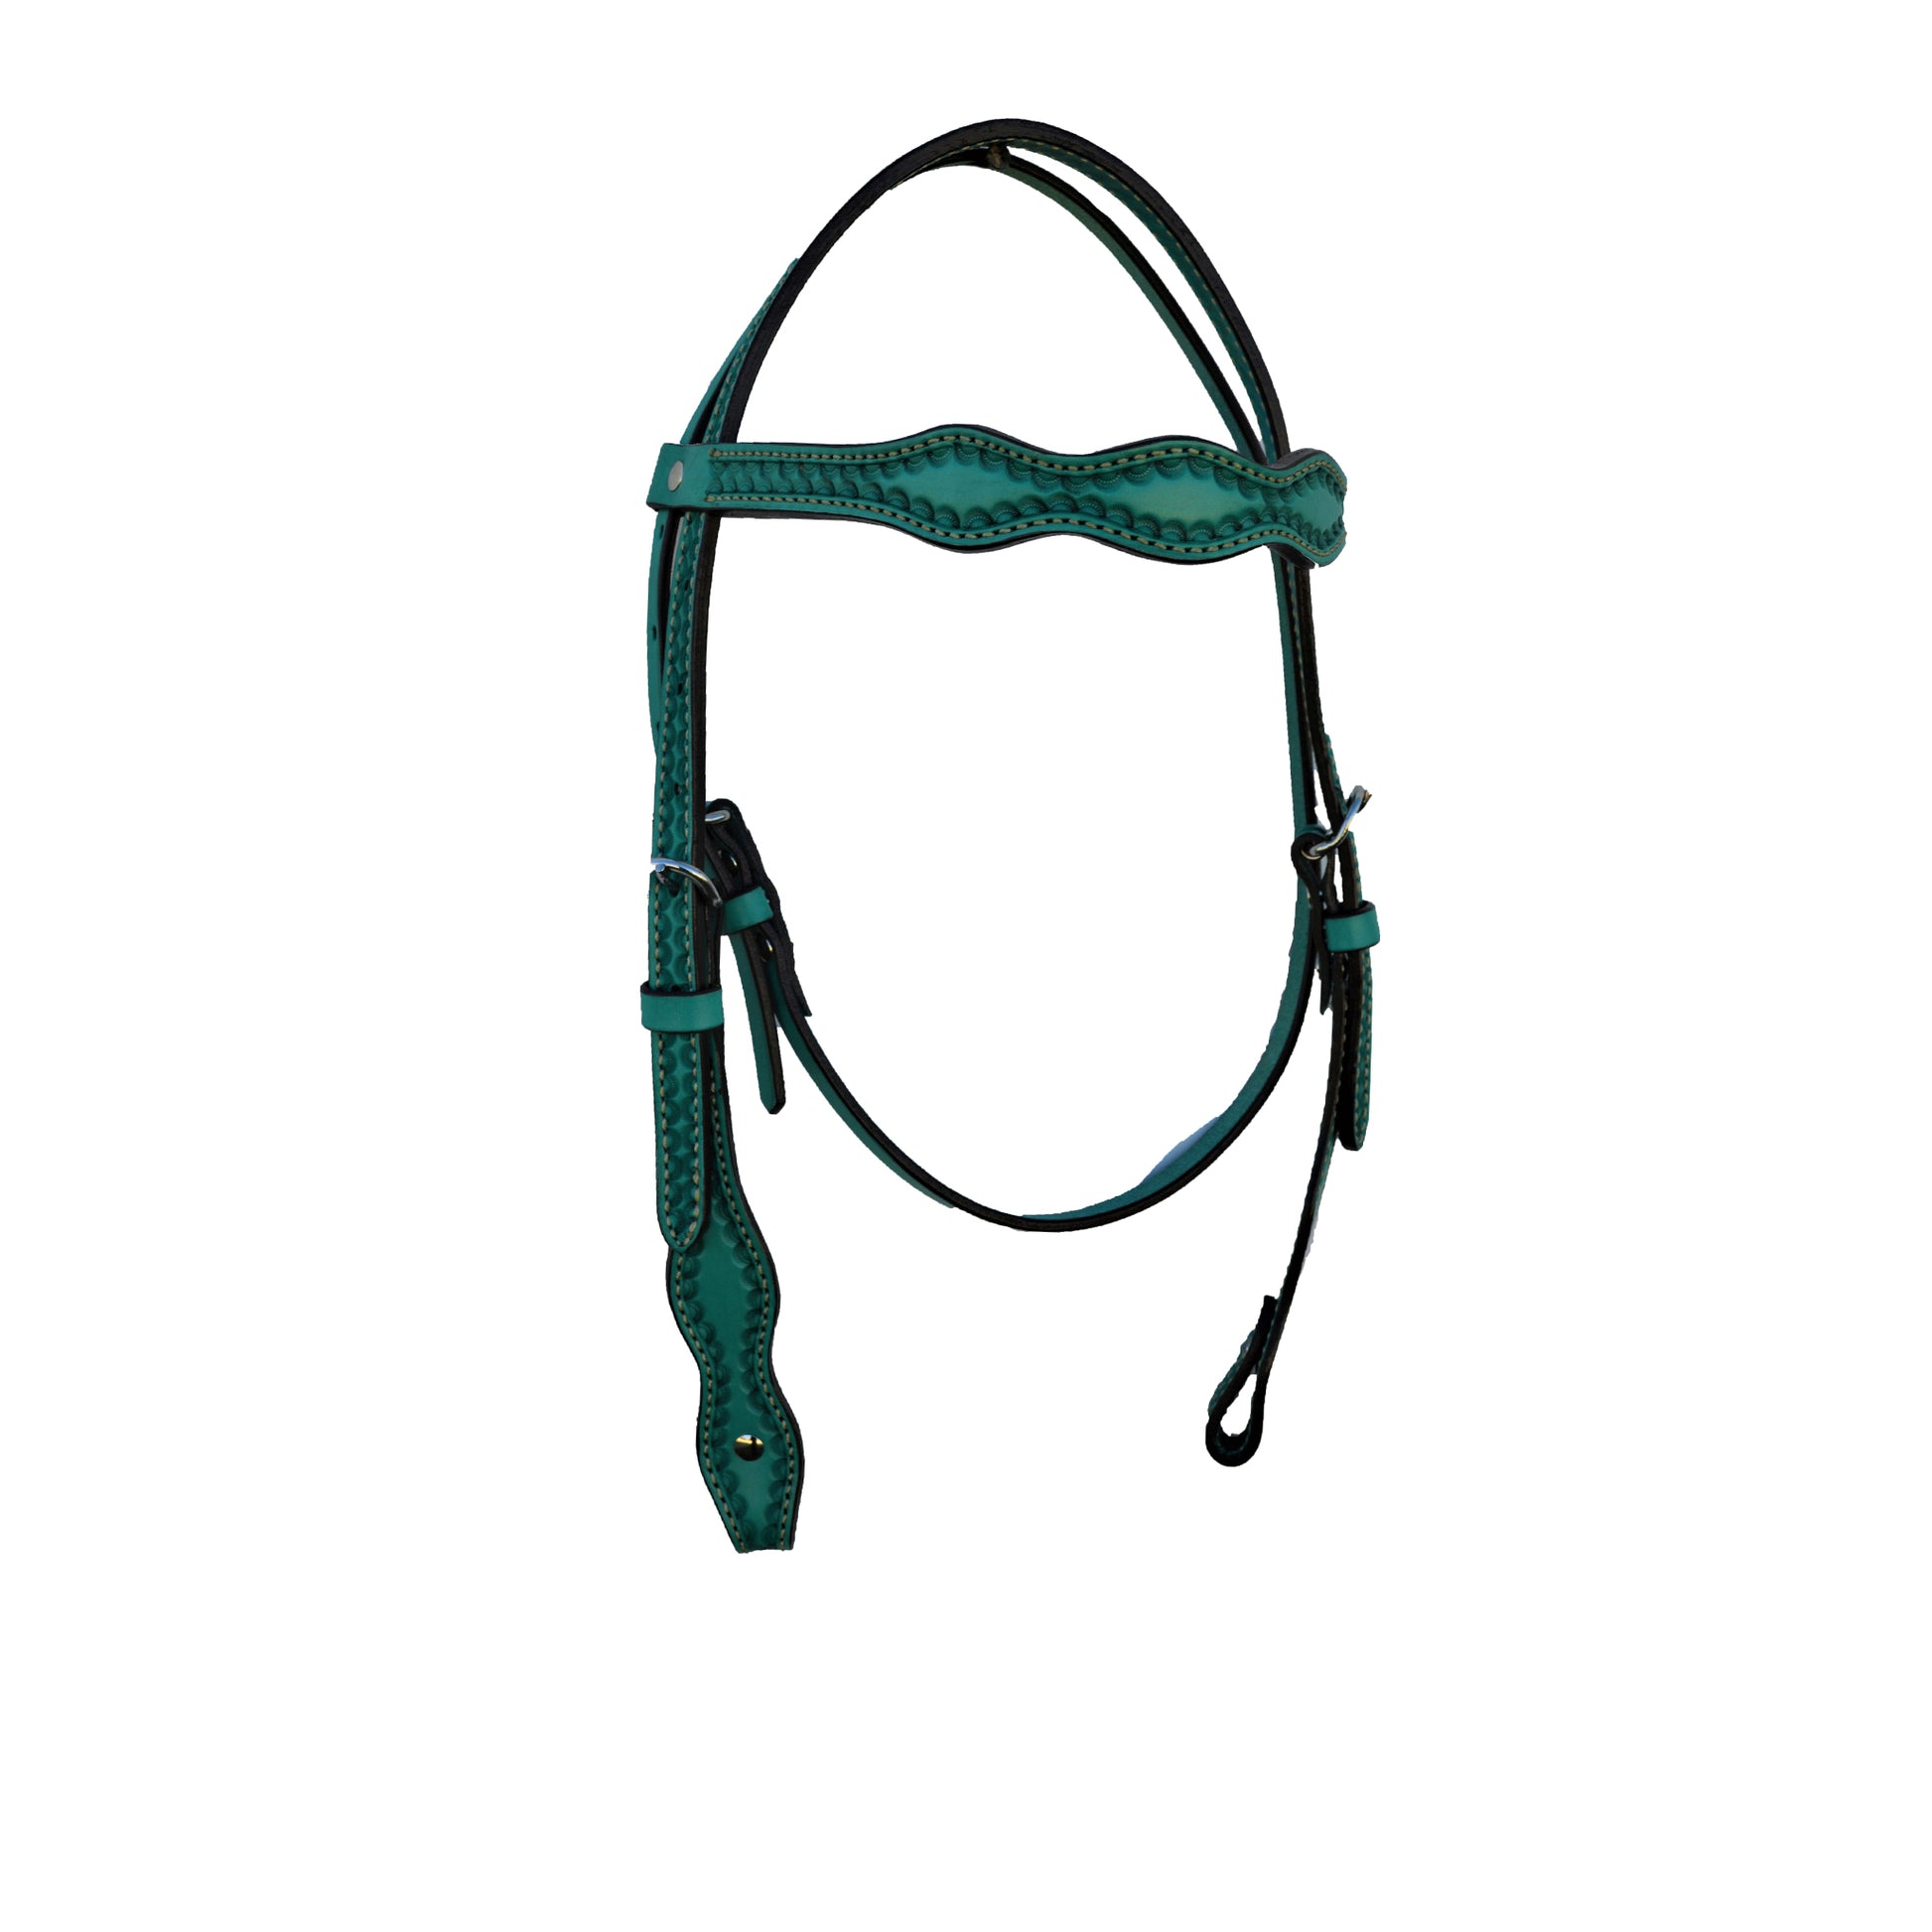 1/2" Scalloped browband headstall turquoise leather border shell tooling (color may vary).